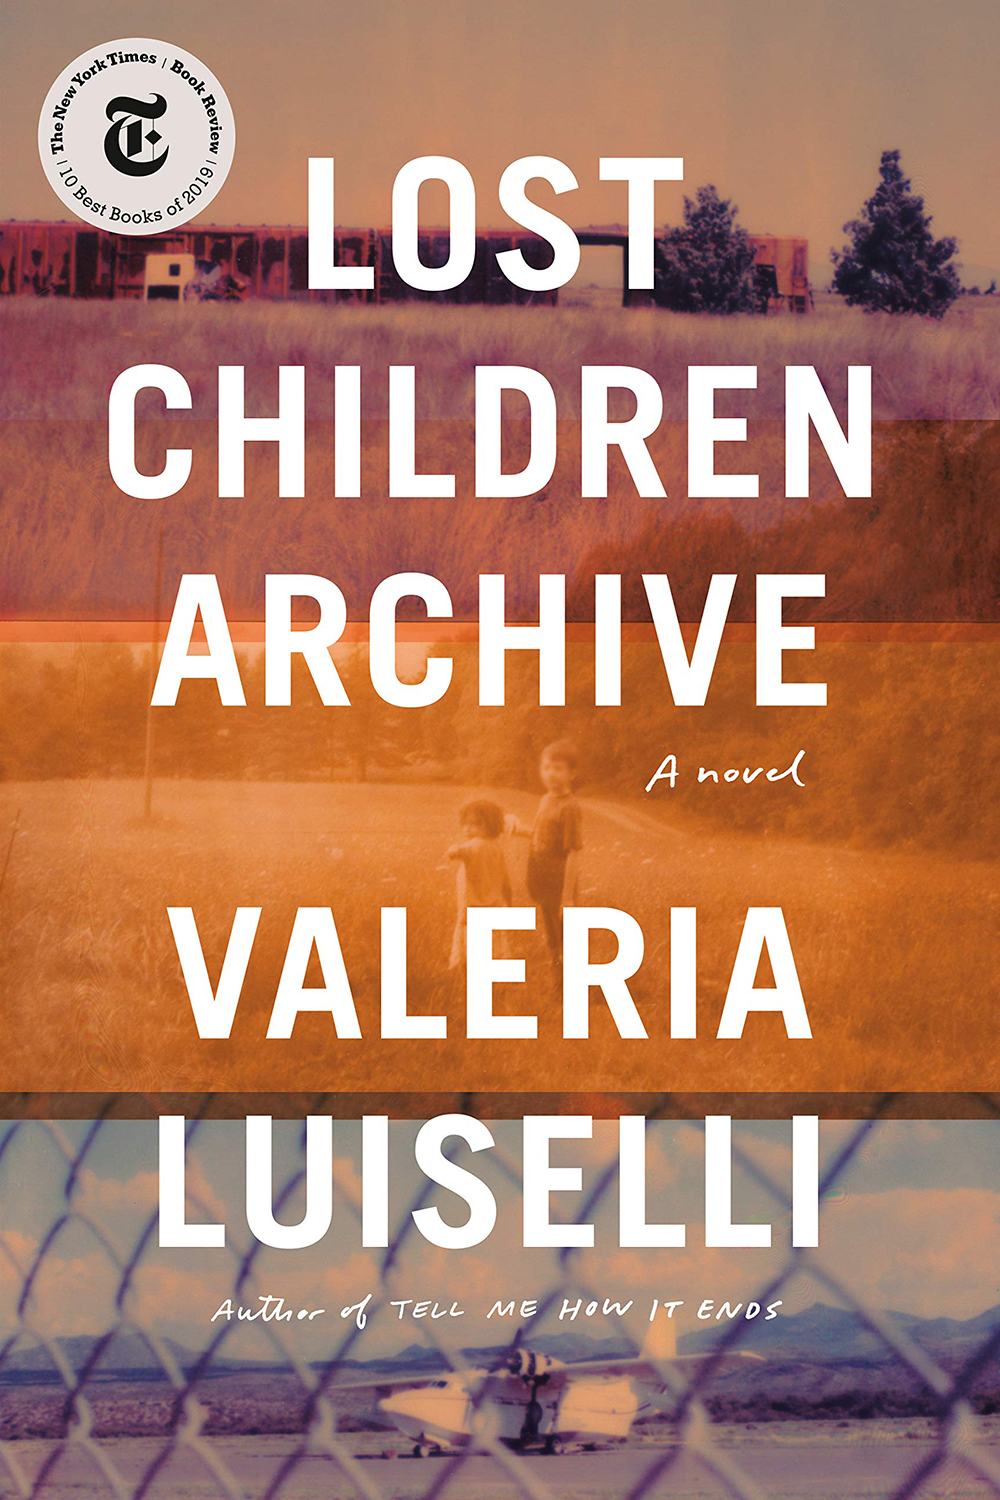 Lost Children Archive, a novel by Valeria Luiselli